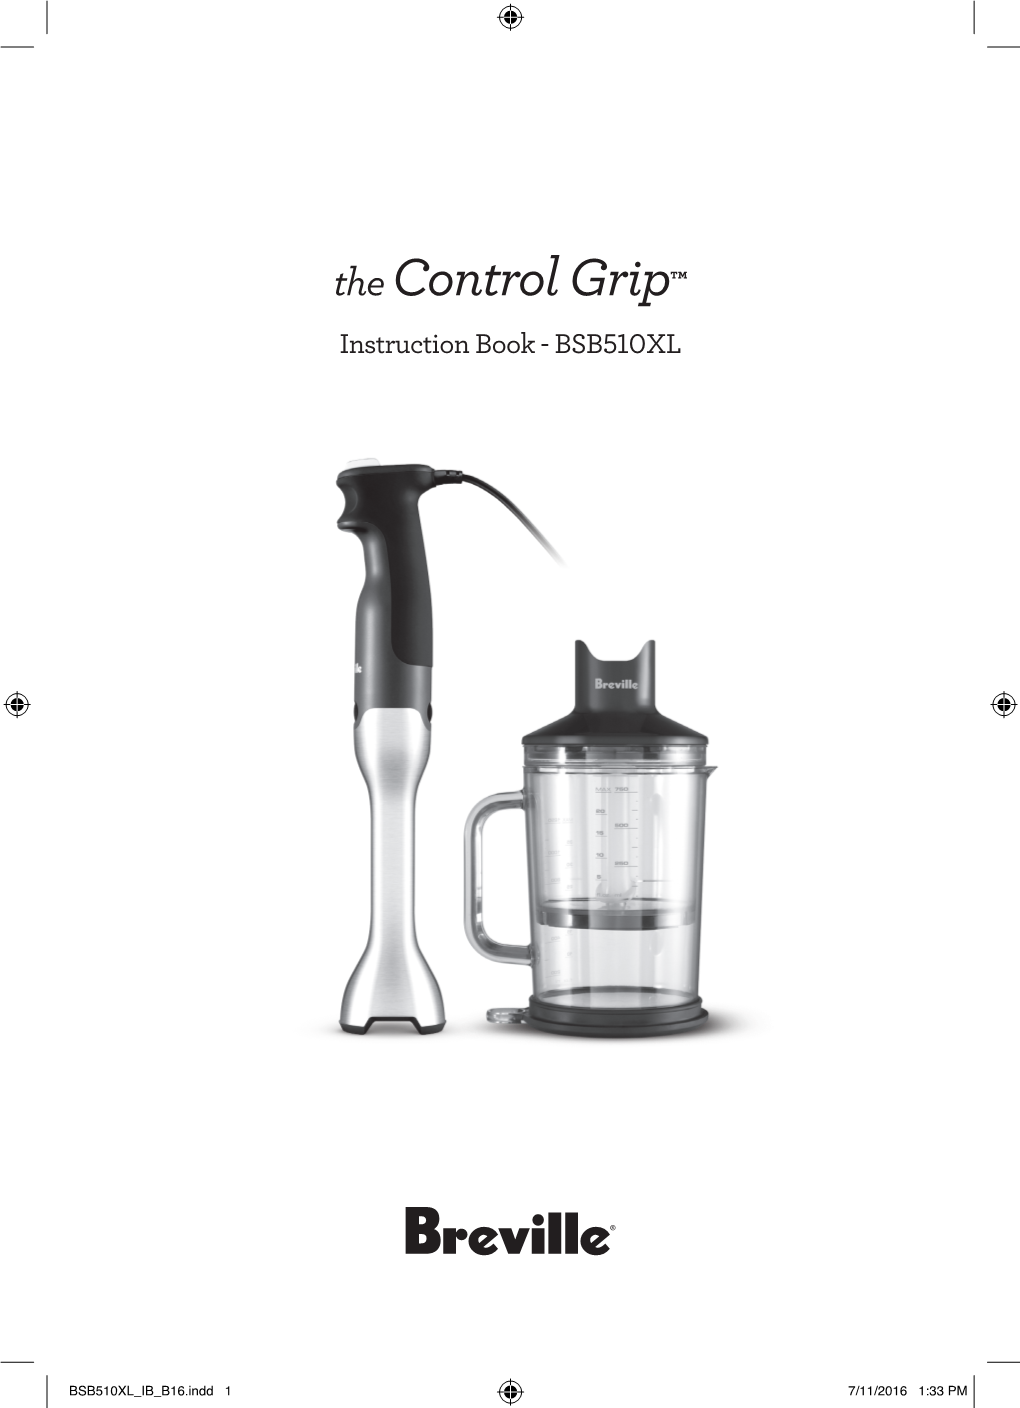 The Control Grip™ Instruction Book - BSB510XL